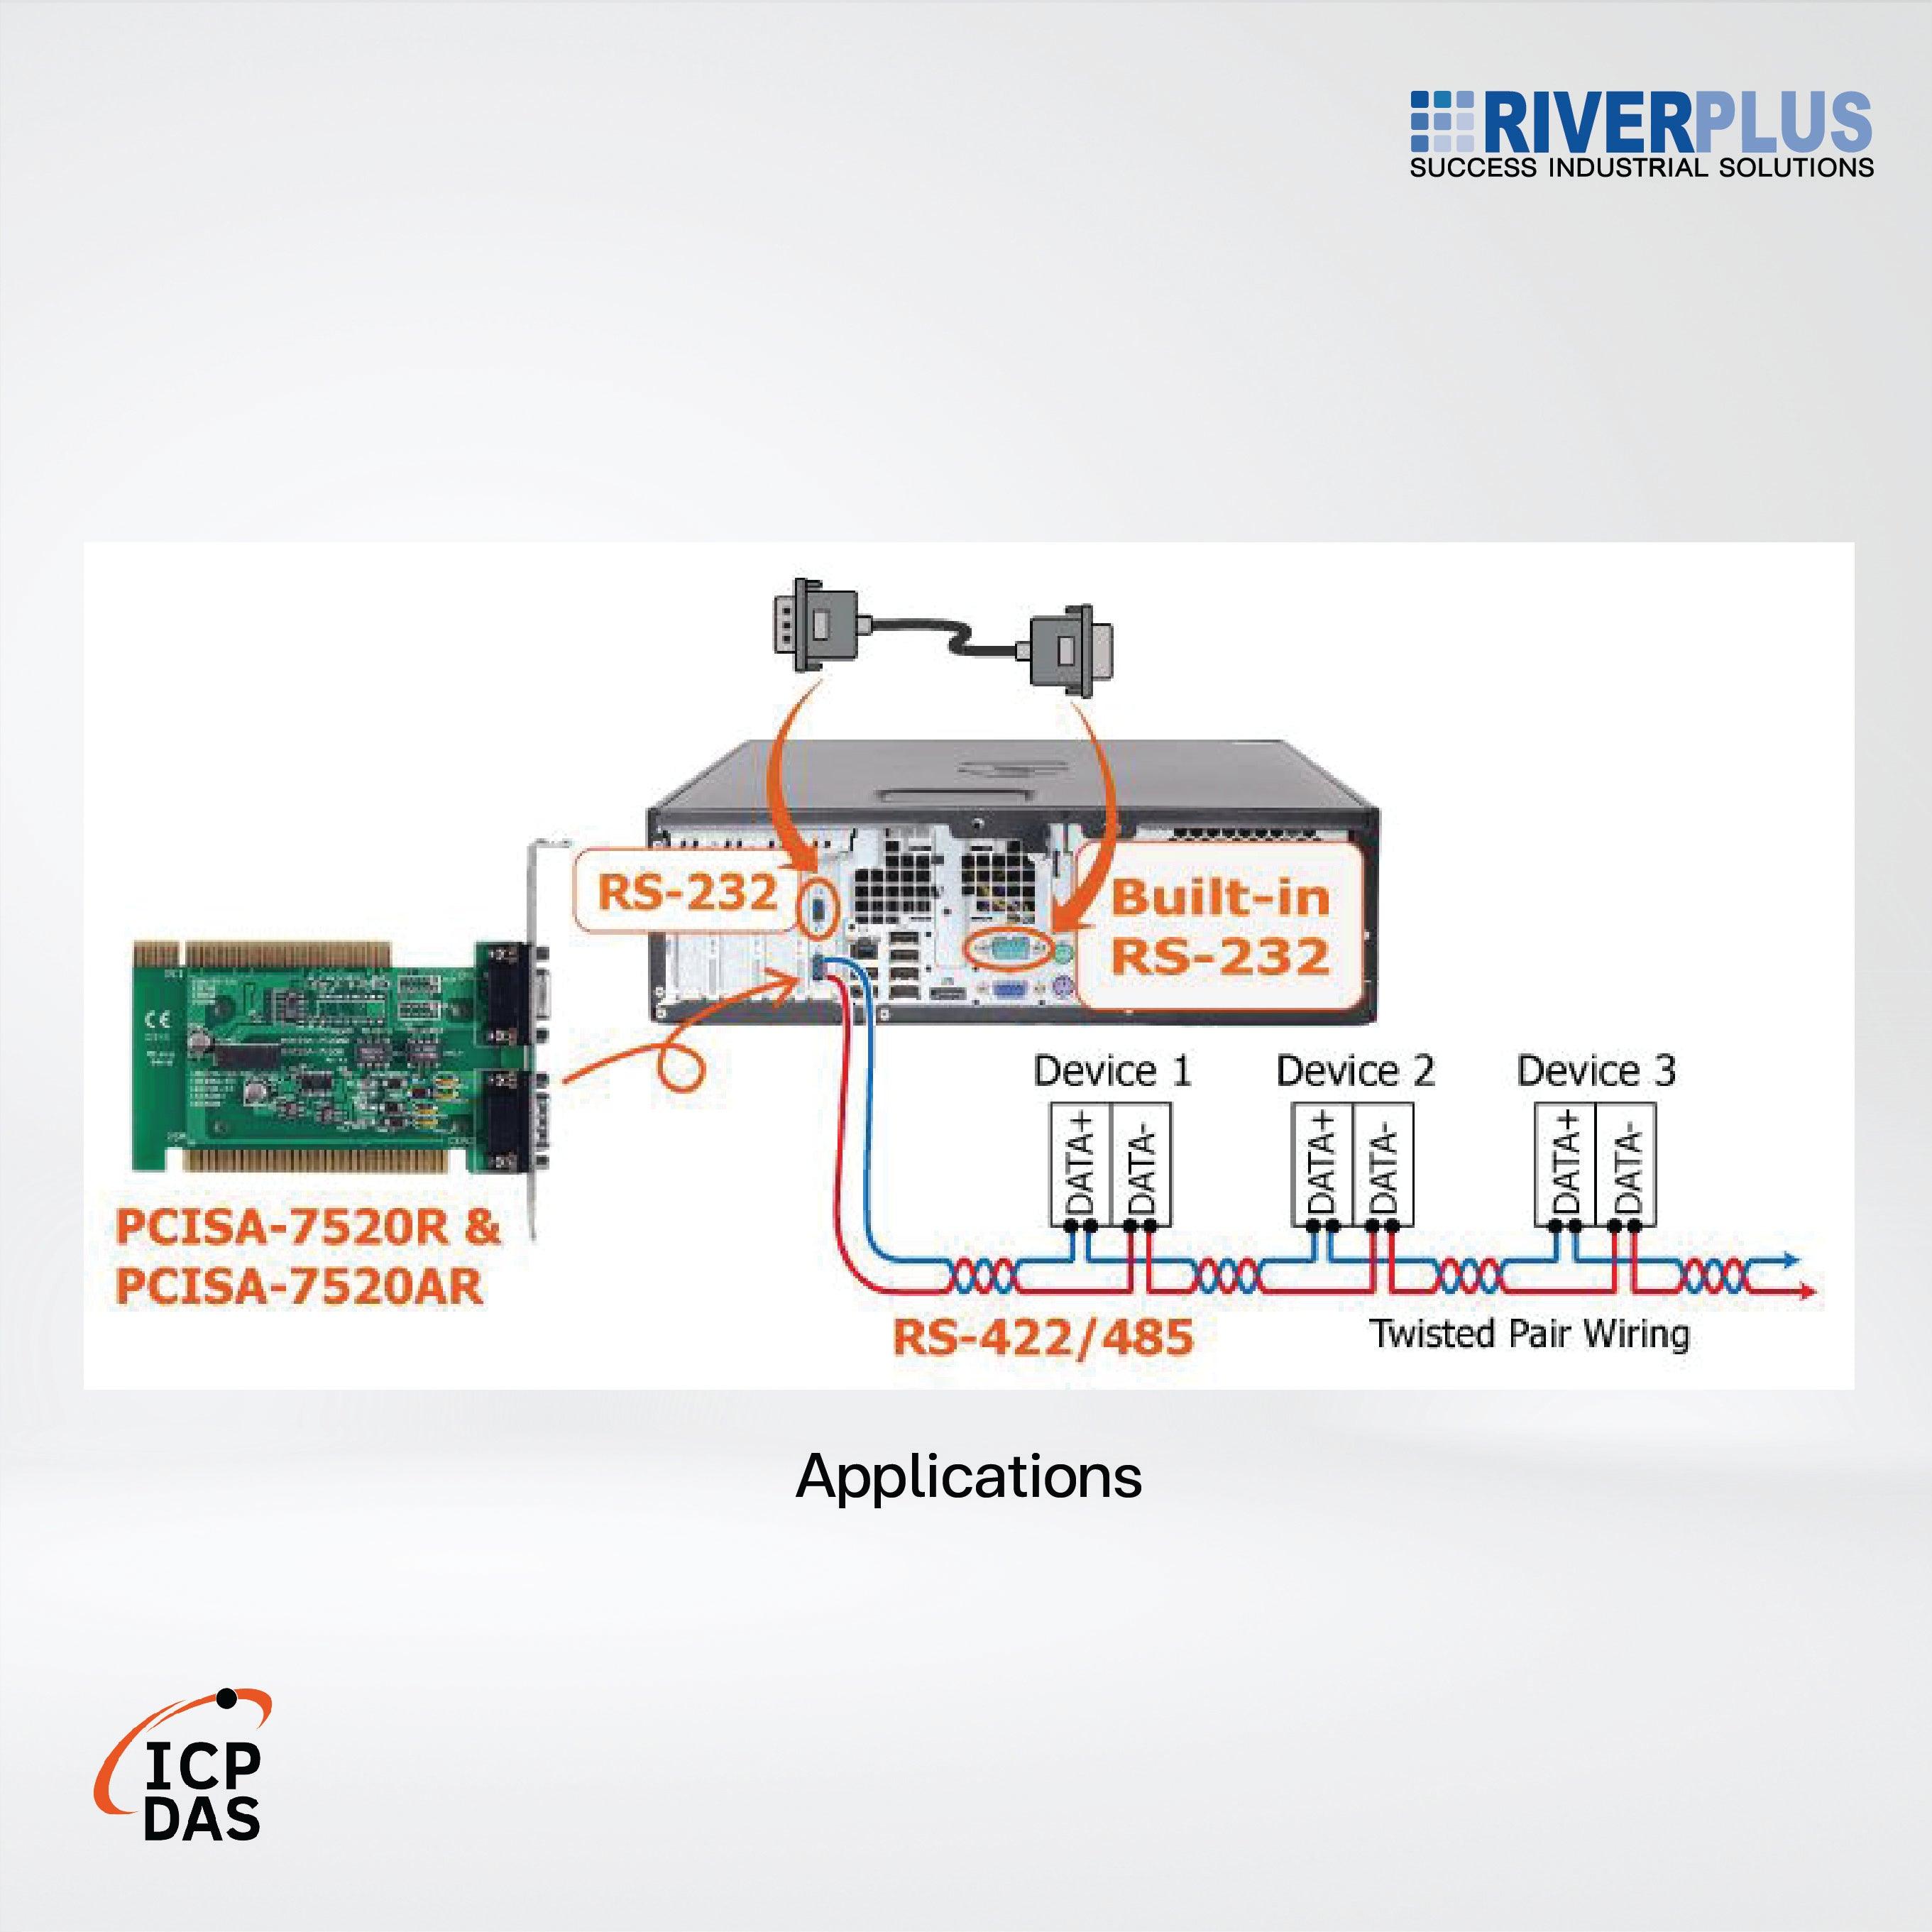 PCISA-7520AR Isolated RS-232 to RS-422/485 Converter Card - Riverplus